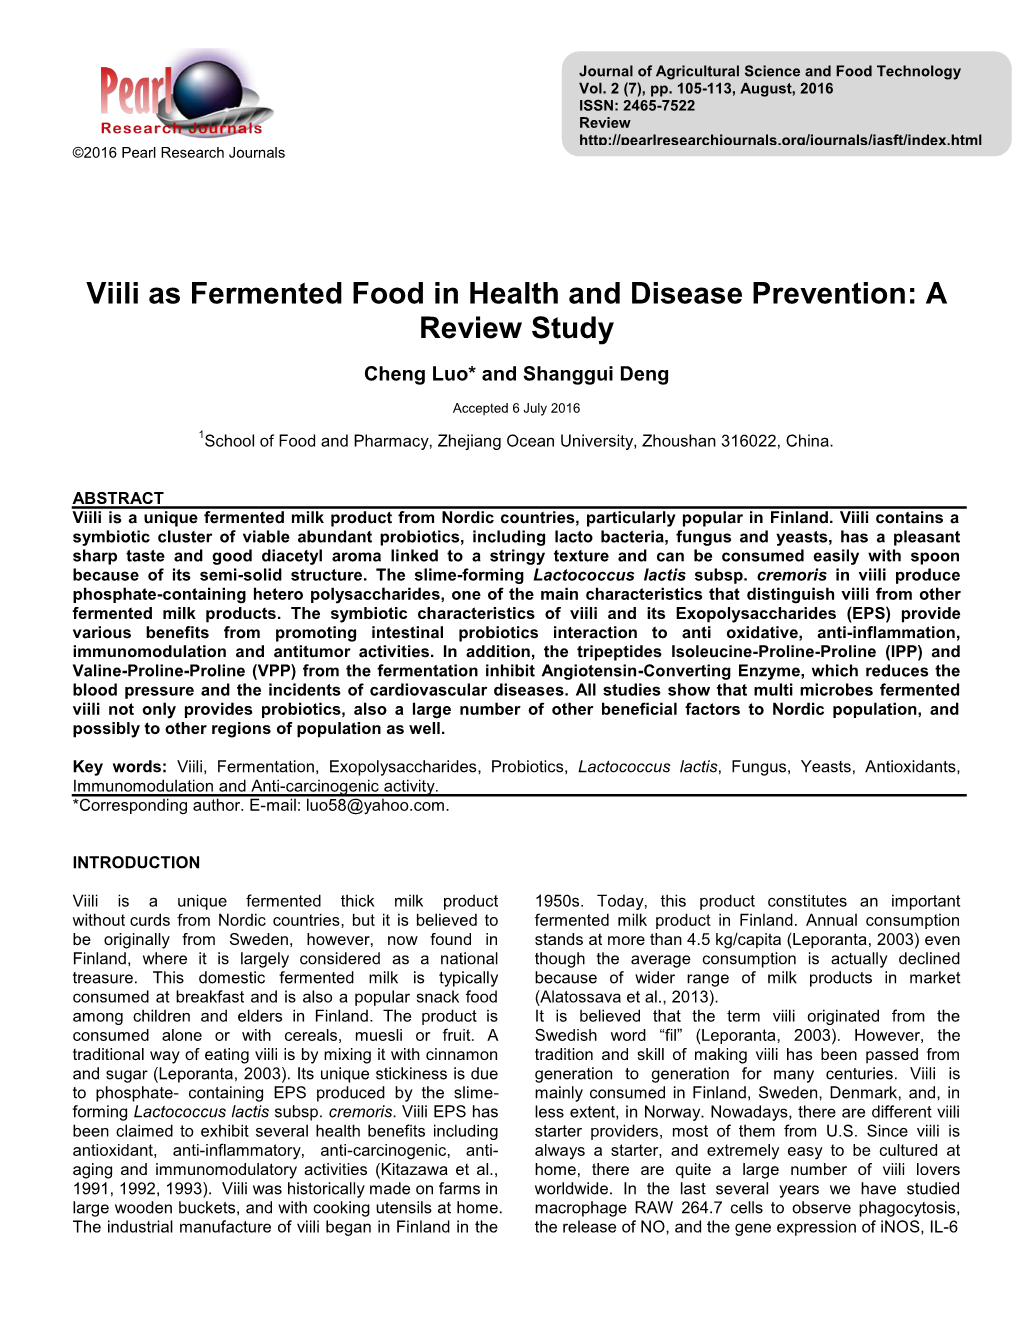 Viili As Fermented Food in Health and Disease Prevention: a Review Study